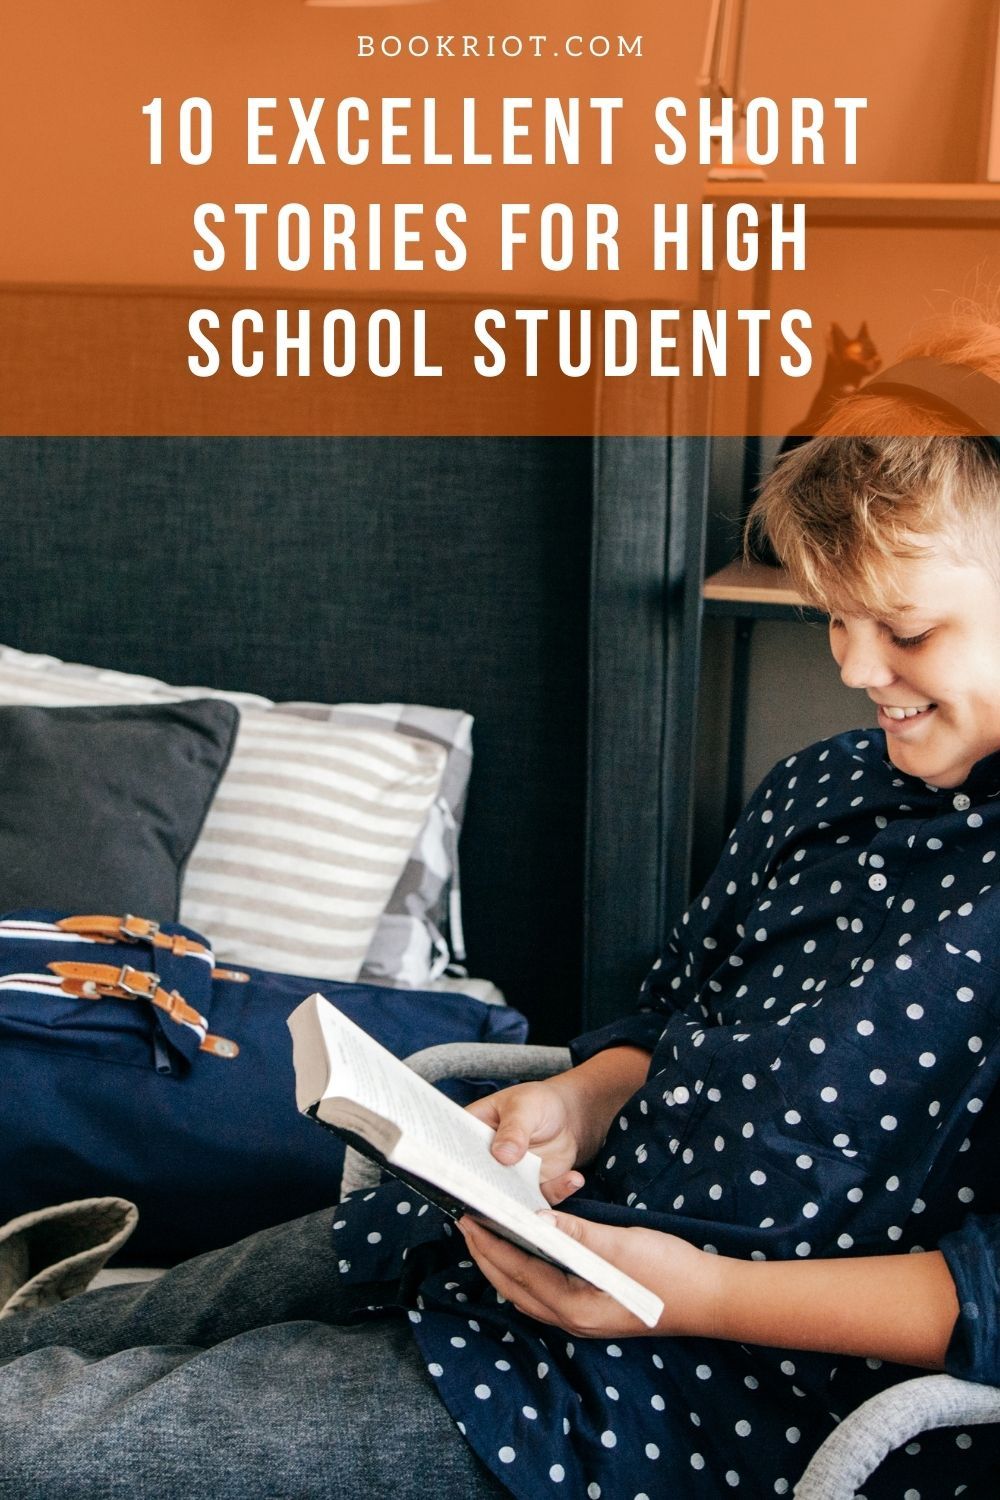 10-excellent-short-stories-for-high-school-students-book-riot